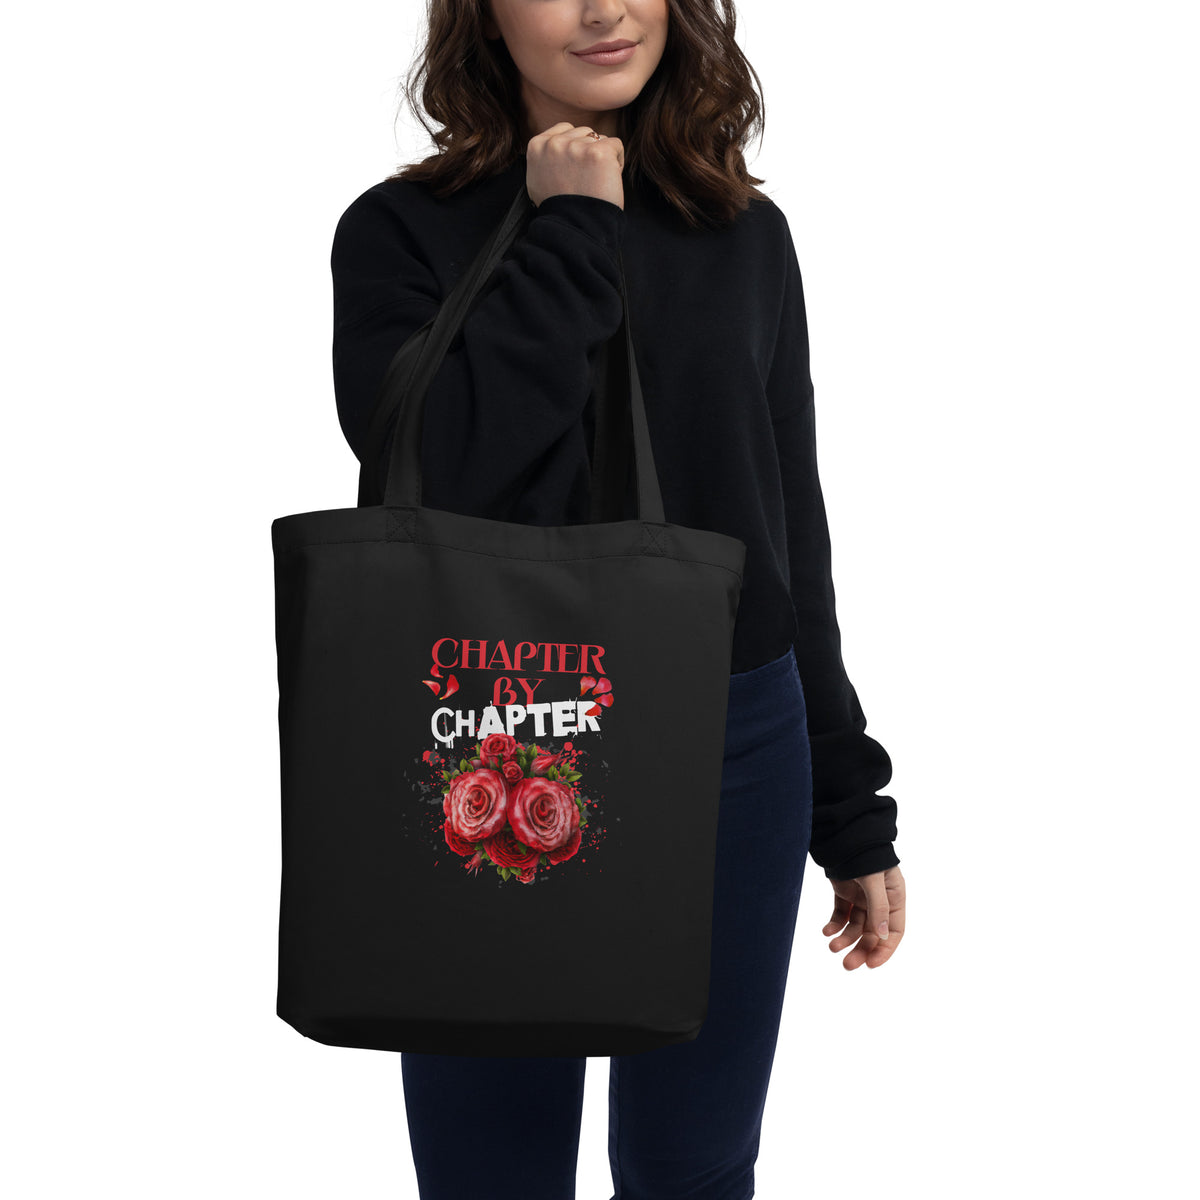 Chapter by Chapter Tote Bag